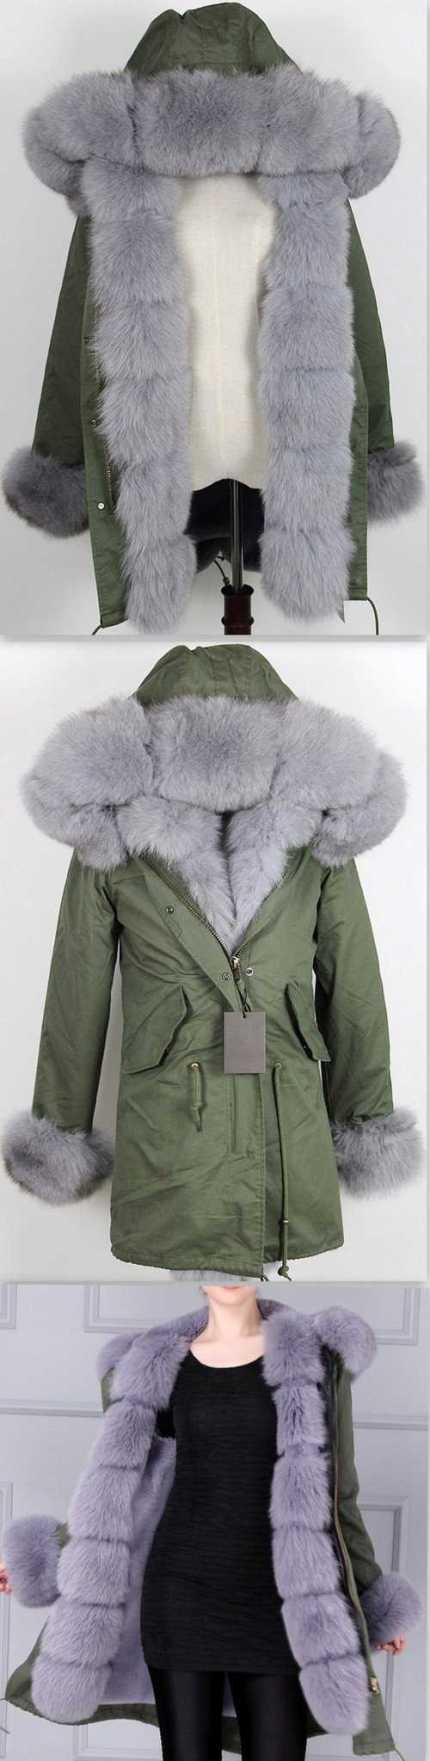 Army Parka Military Parka Coat with Fox Fur-Green/Grey | DESIGNER INSPIRED FASHIONS